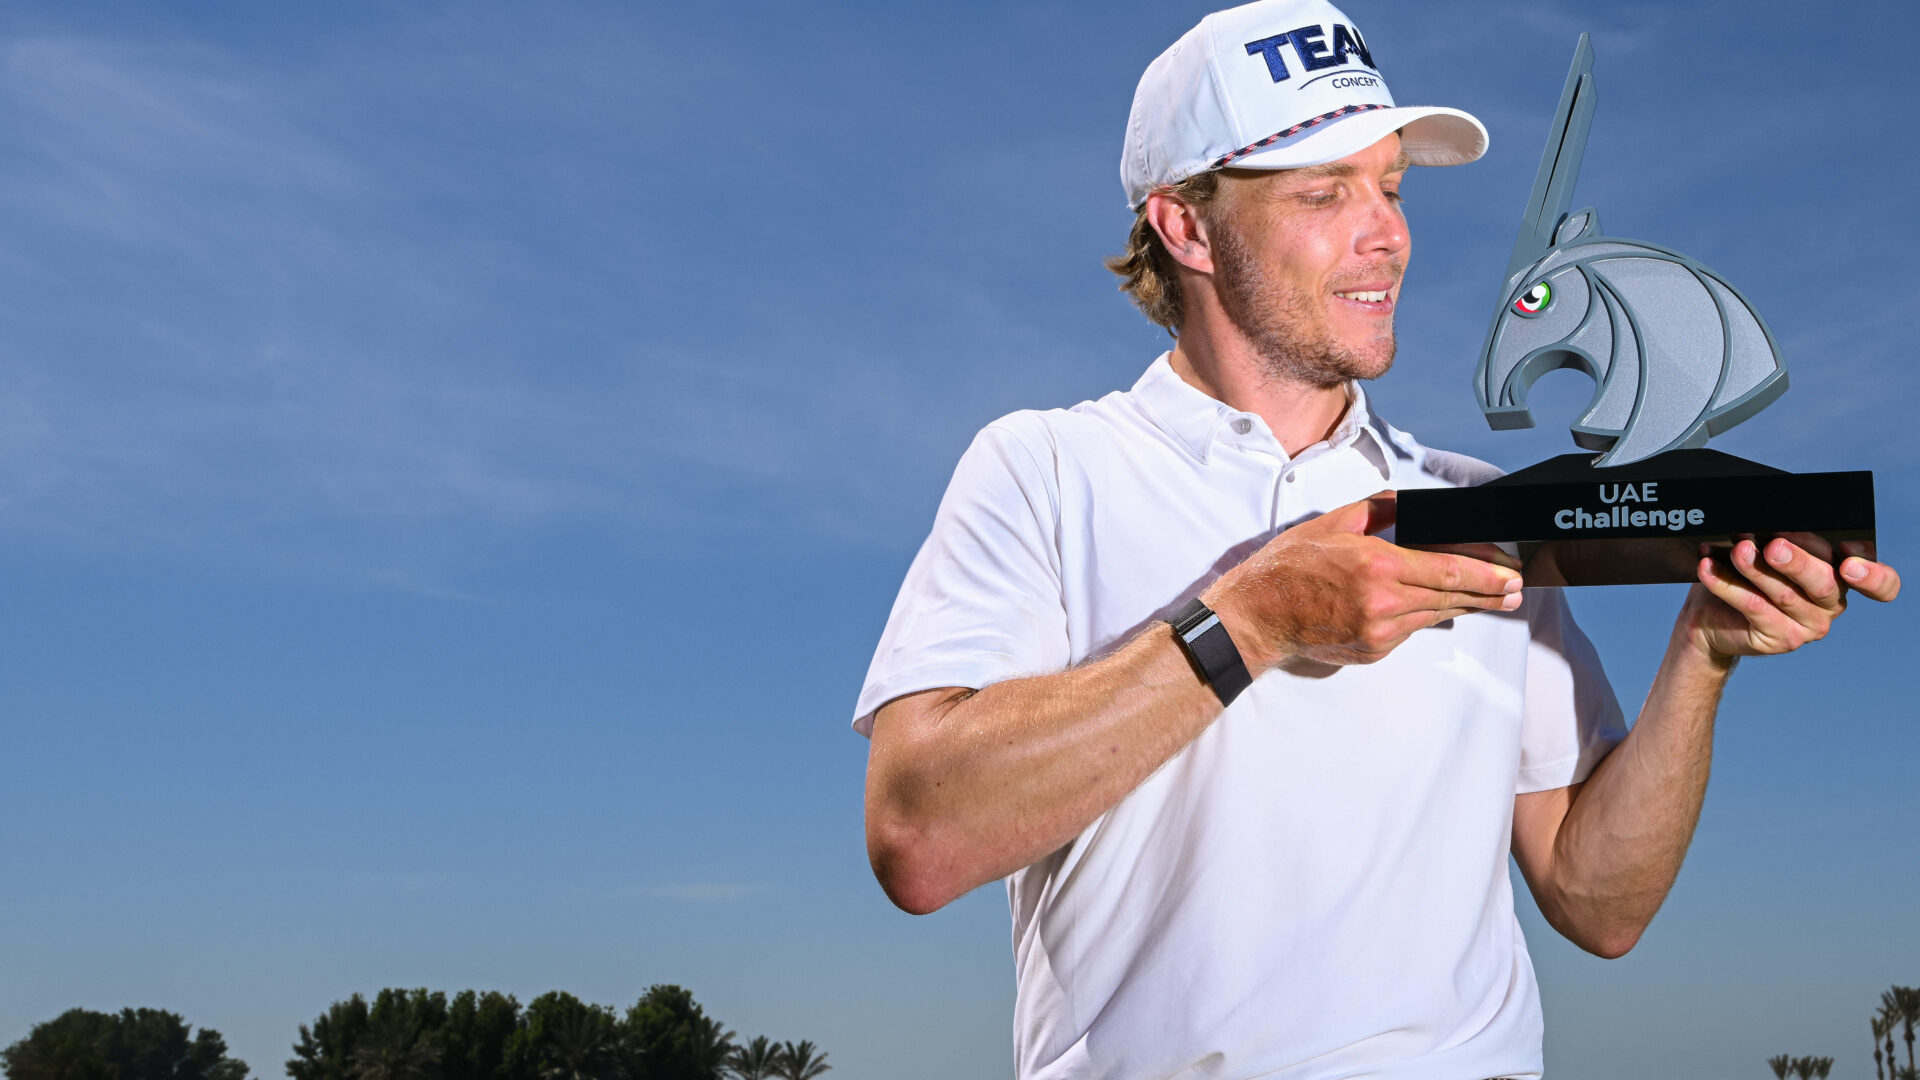 ABU DHABI, UNITED ARAB EMIRATES - MAY 07: Maximilian Rottluff of Germany poses with the trophy after winning the UAE Challenge at Saadiyat Beach Golf Club on May 7, 2023 in Abu Dhabi, United Arab Emirates. (Photo by Octavio Passos/Getty Images) tour news